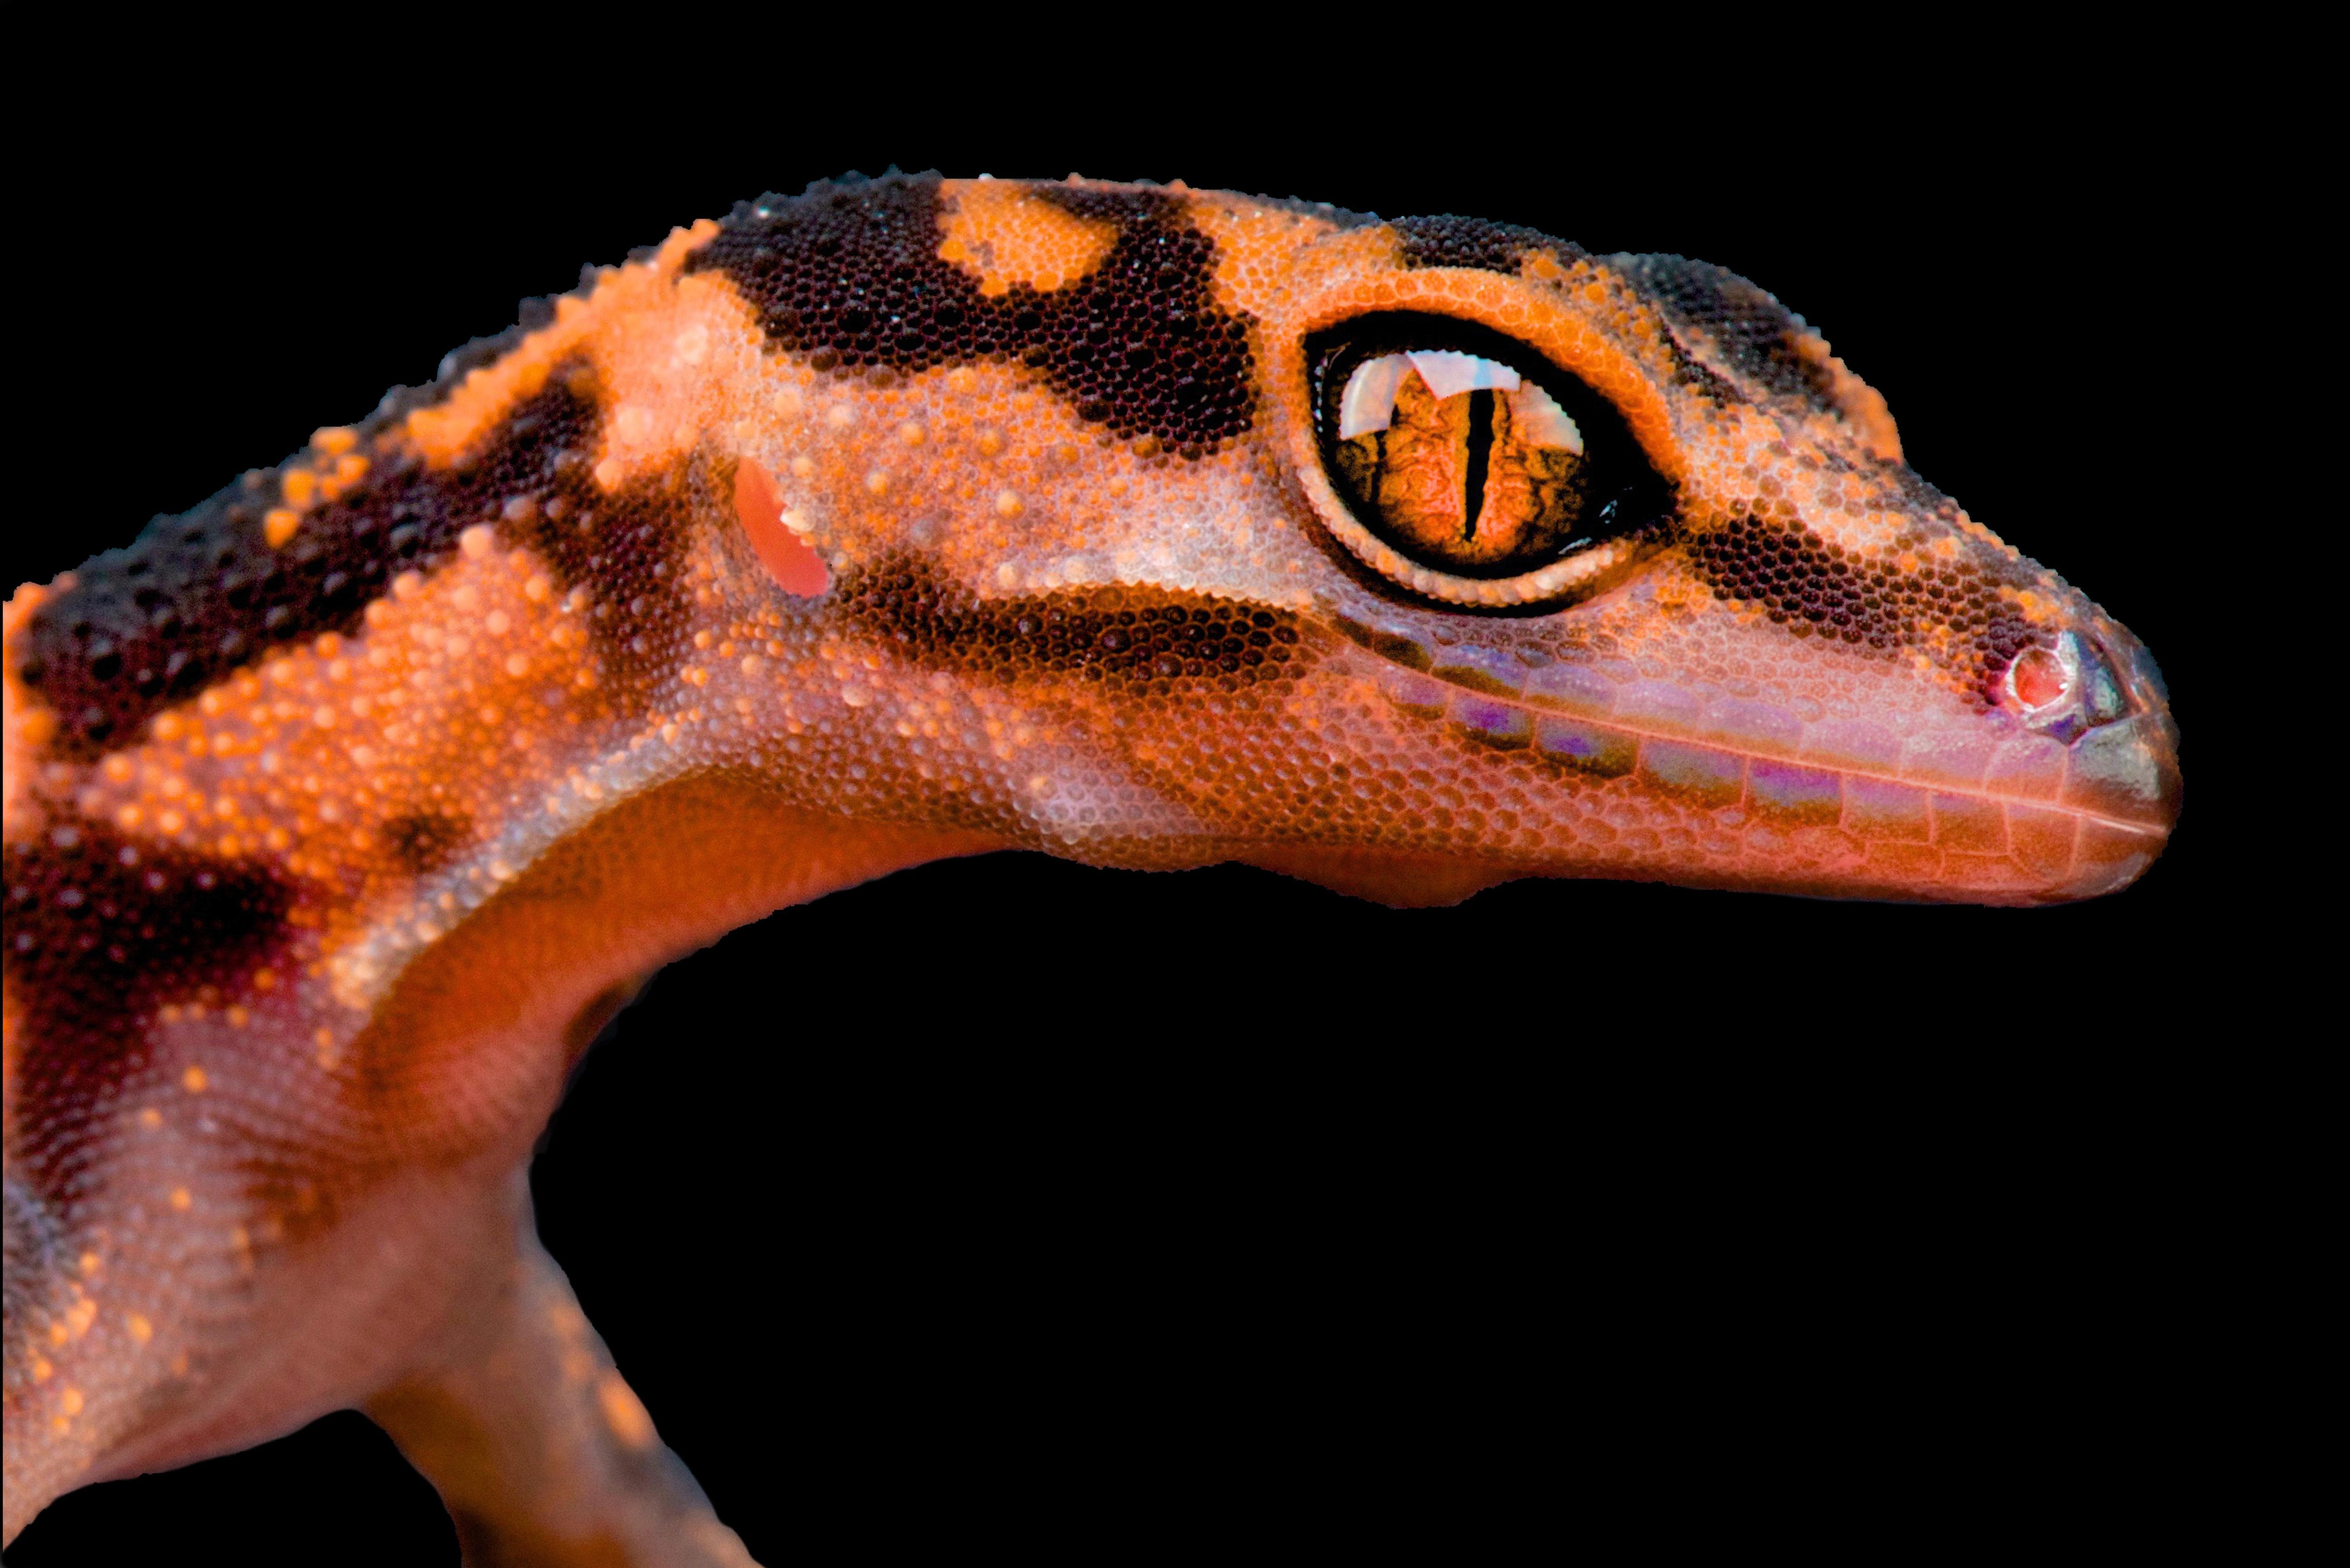 Online Reptile Trade Is a Free-for-All That Threatens Thousands of Species  | Scientific American